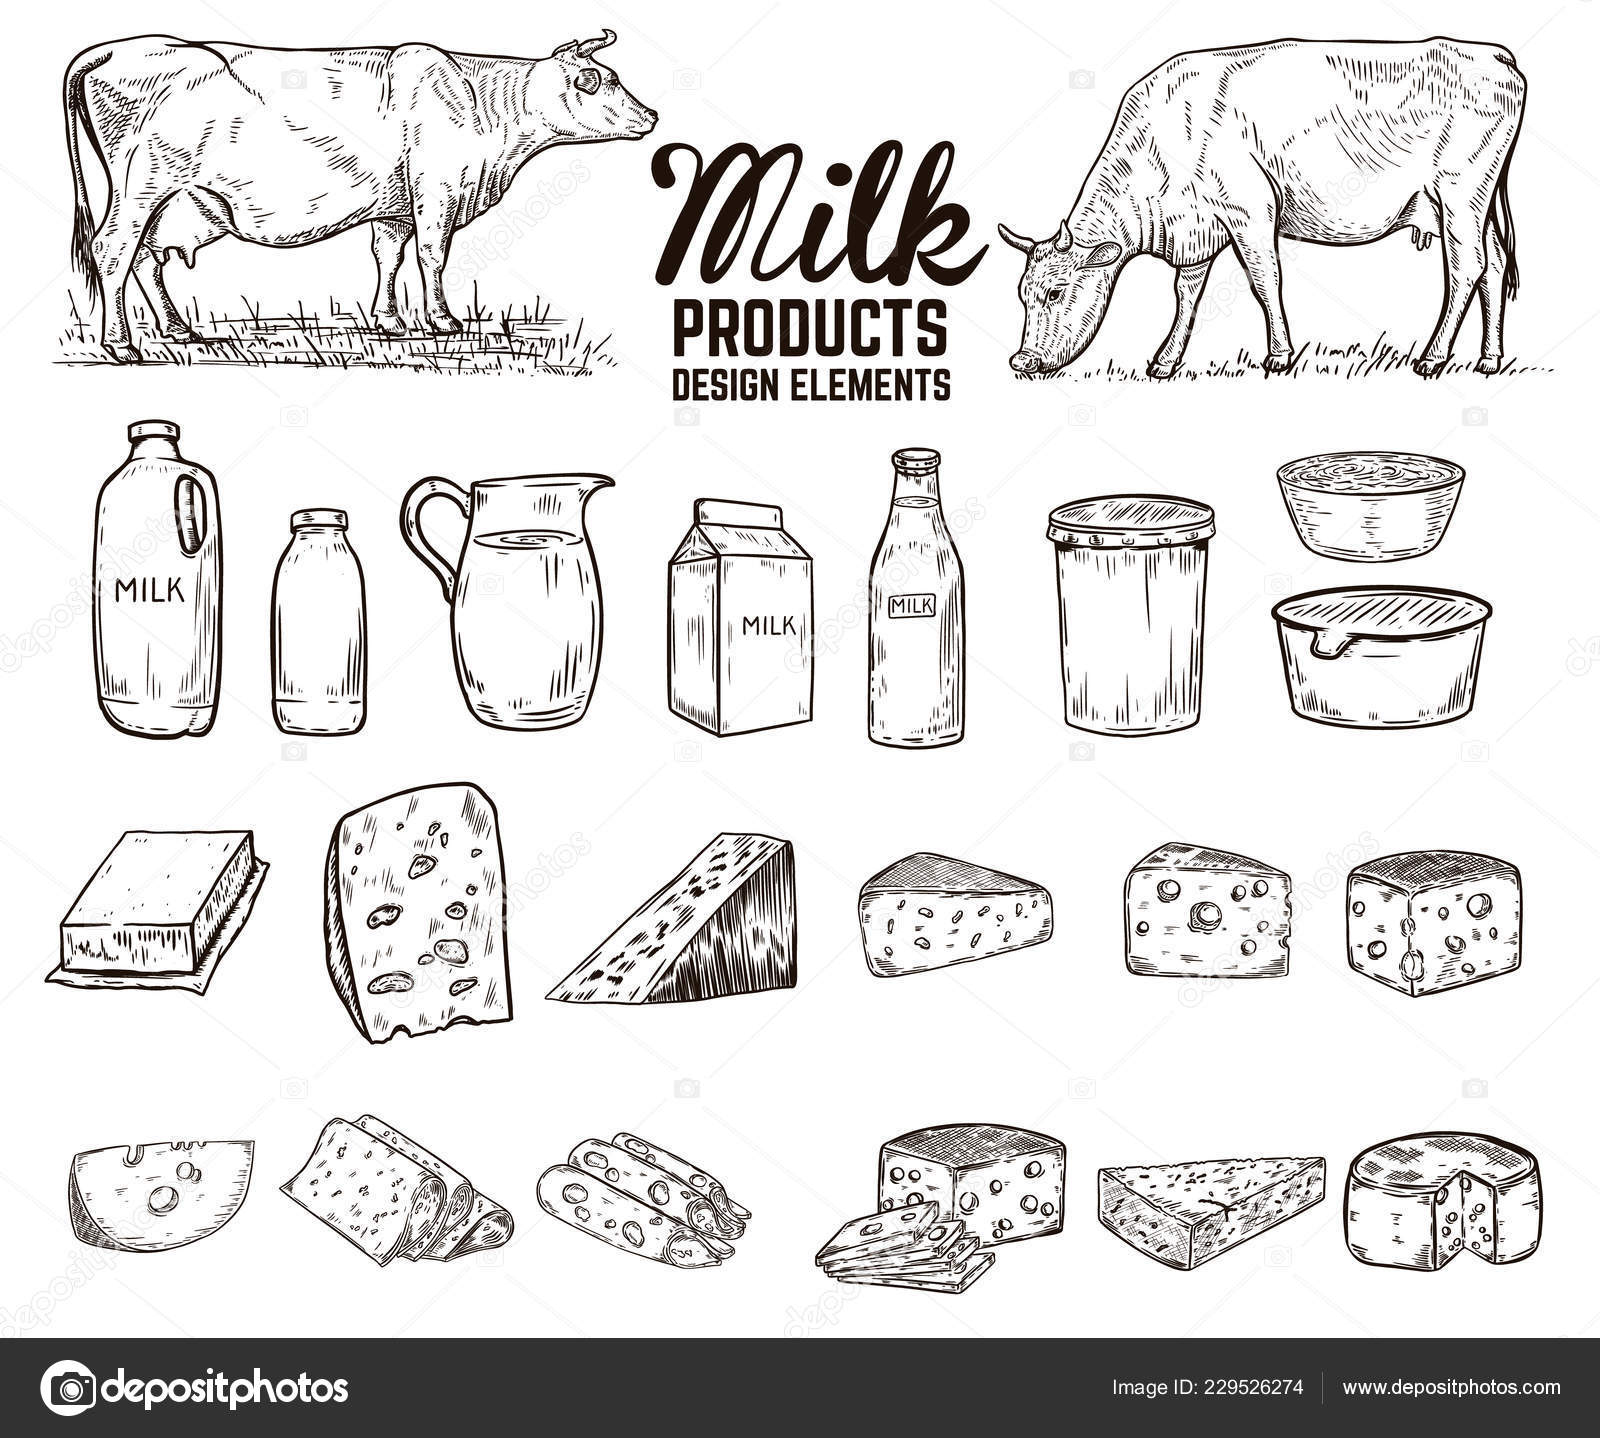 8 sketch drawing of Dairy products in black and white | Vector art  illustration, Illustration, Doodle illustration